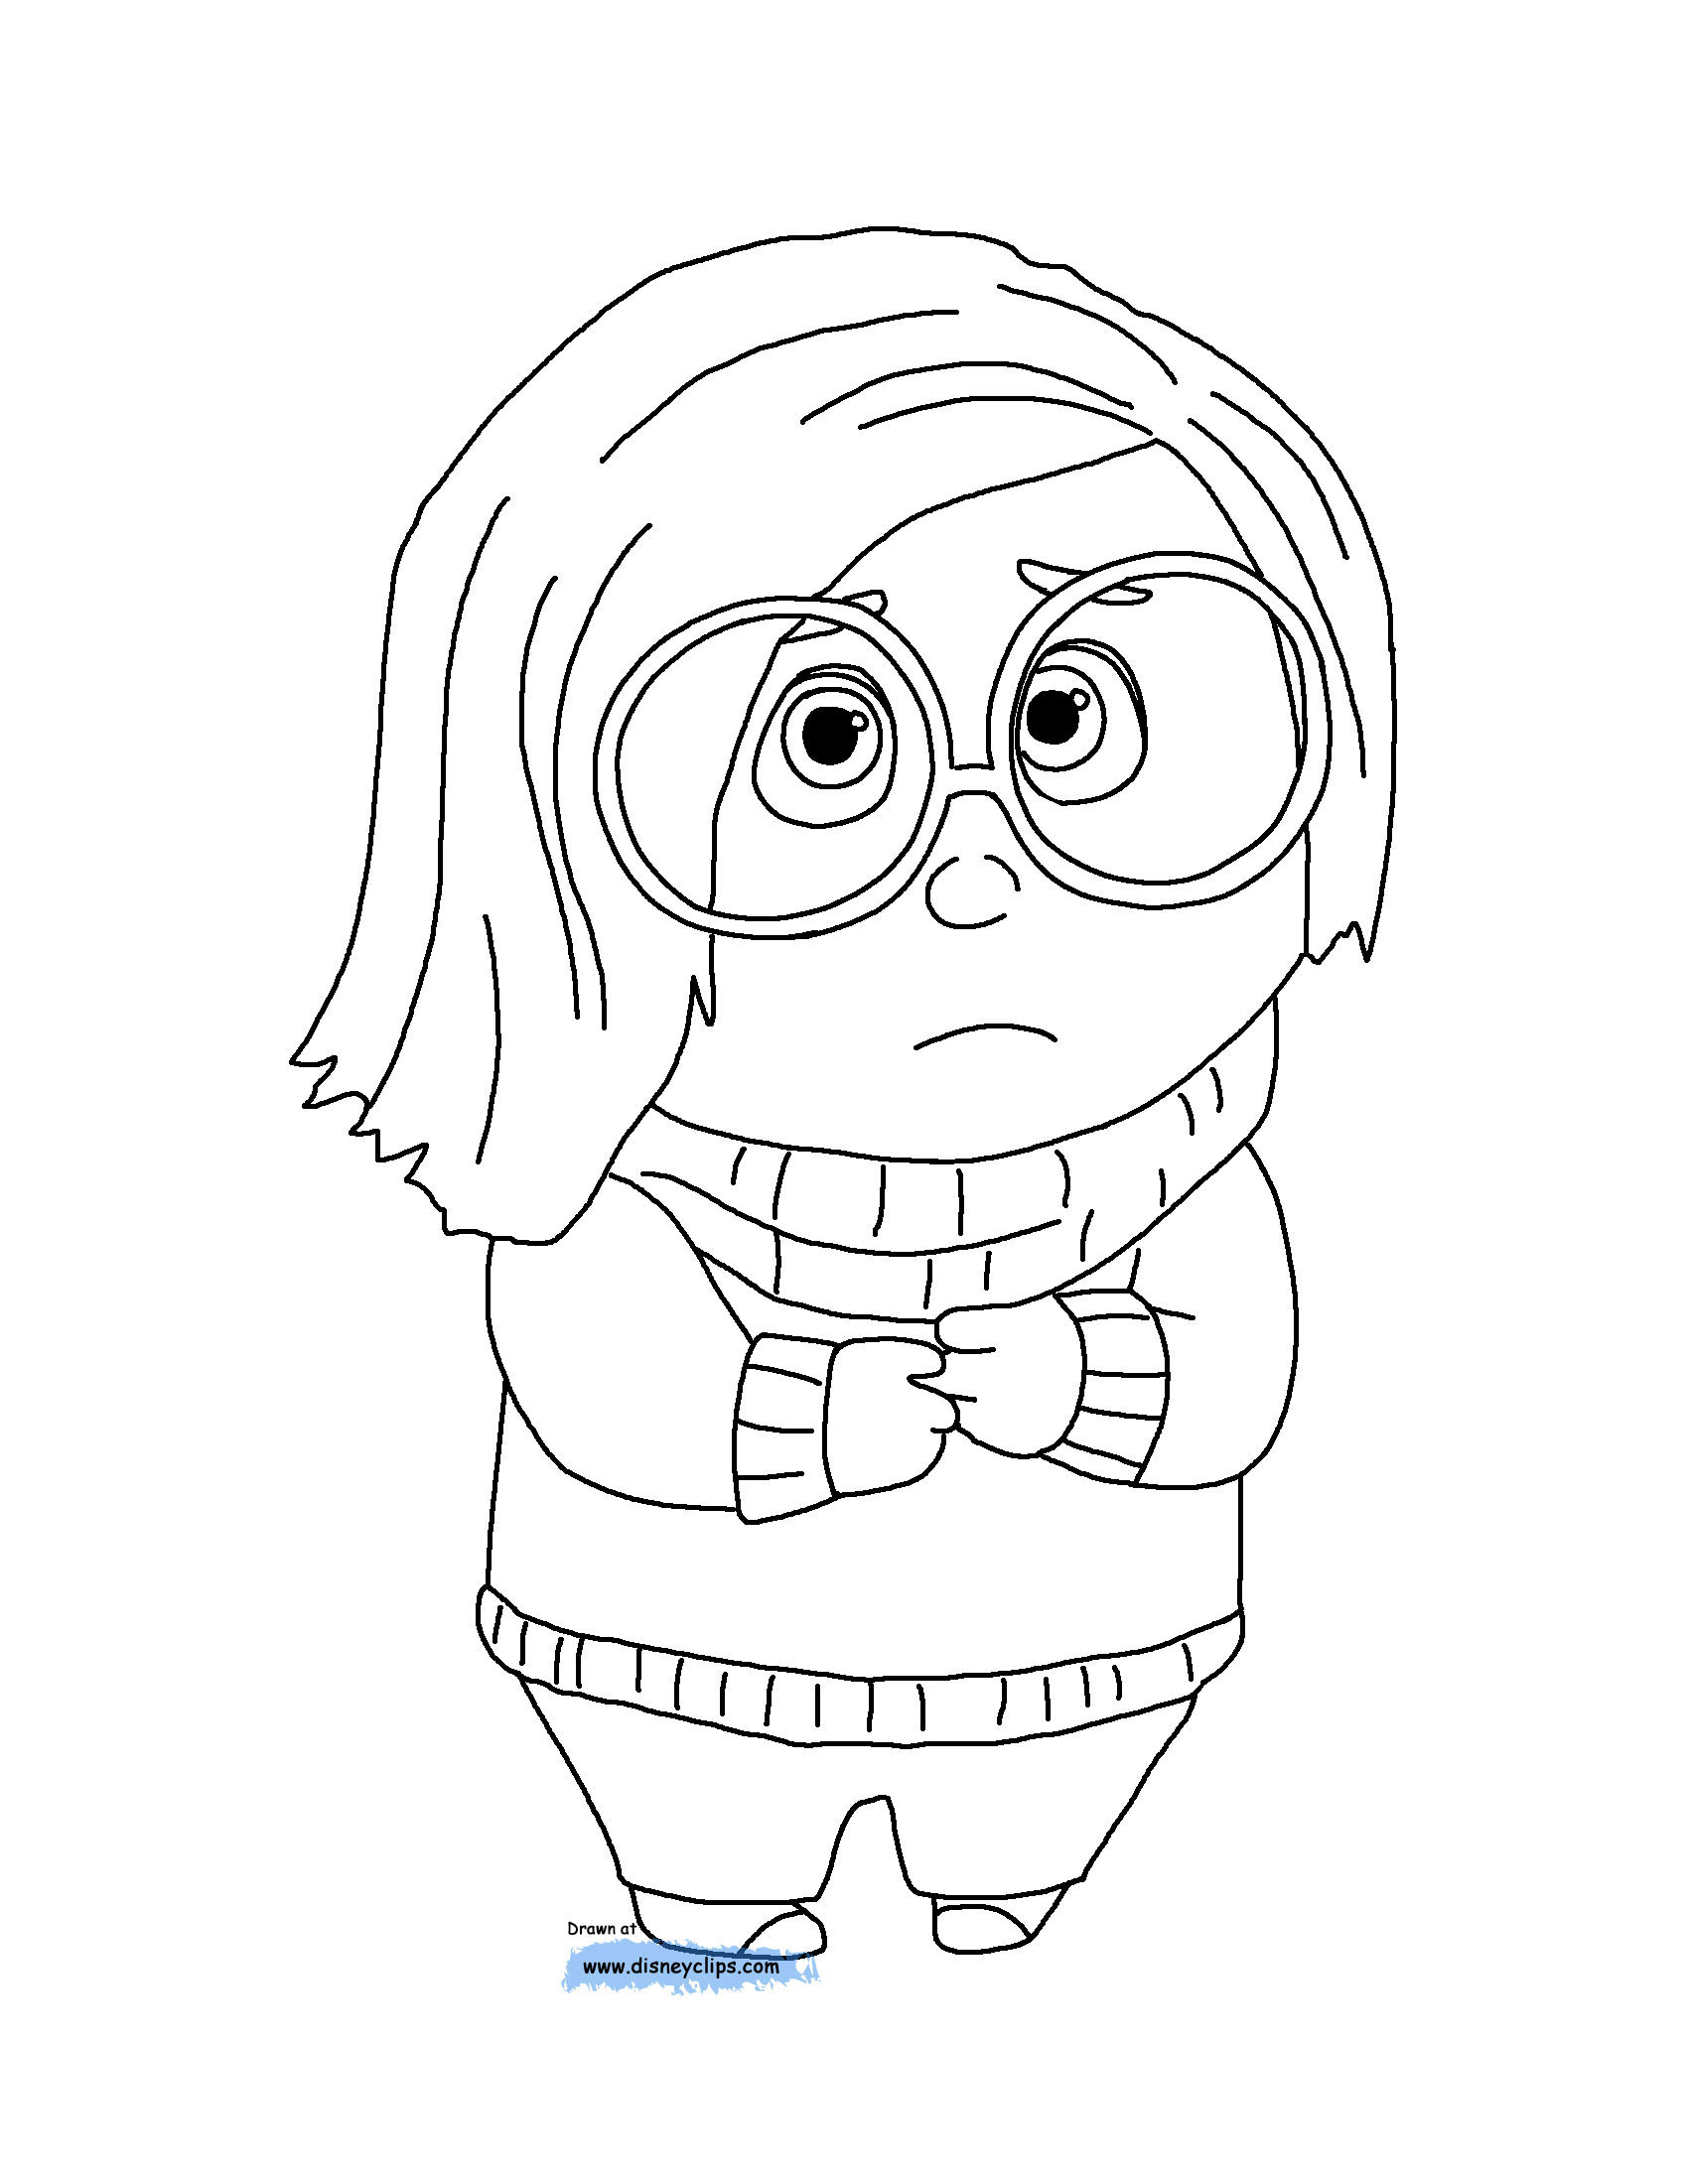 Inside Out Sadness Coloring Page Disneys Inside Out Movie Coloring Pages Create Play Travel